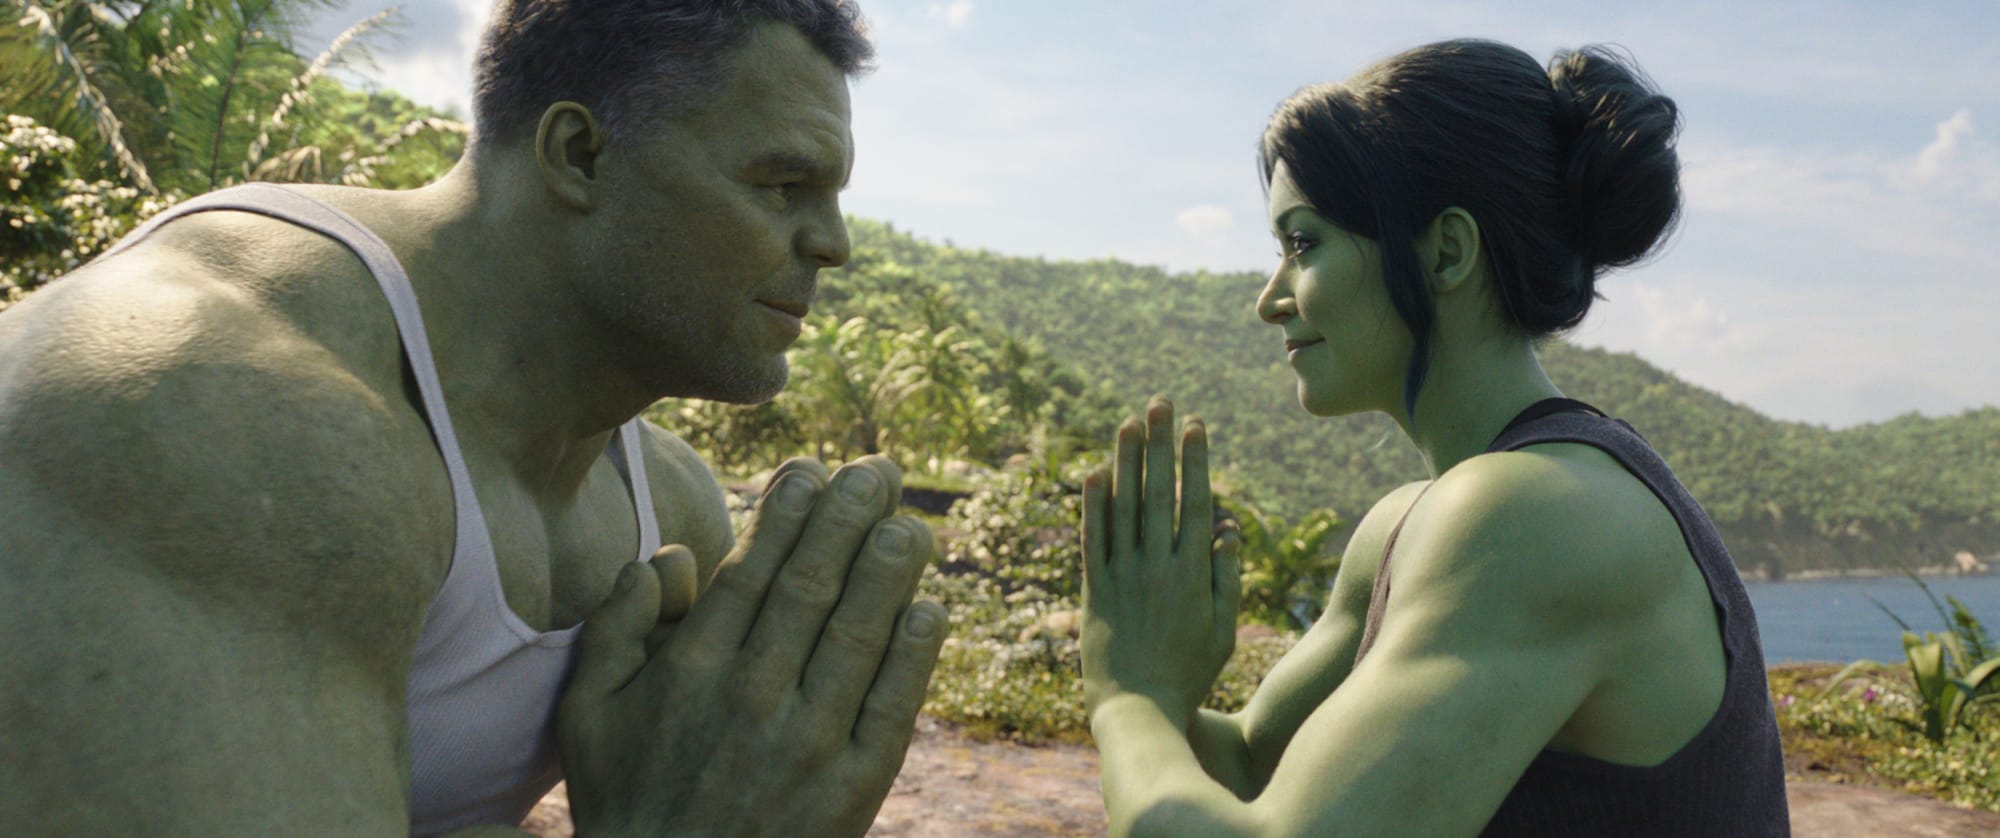 What is the She-Hulk: Attorney at Law Rotten Tomatoes Average Score?